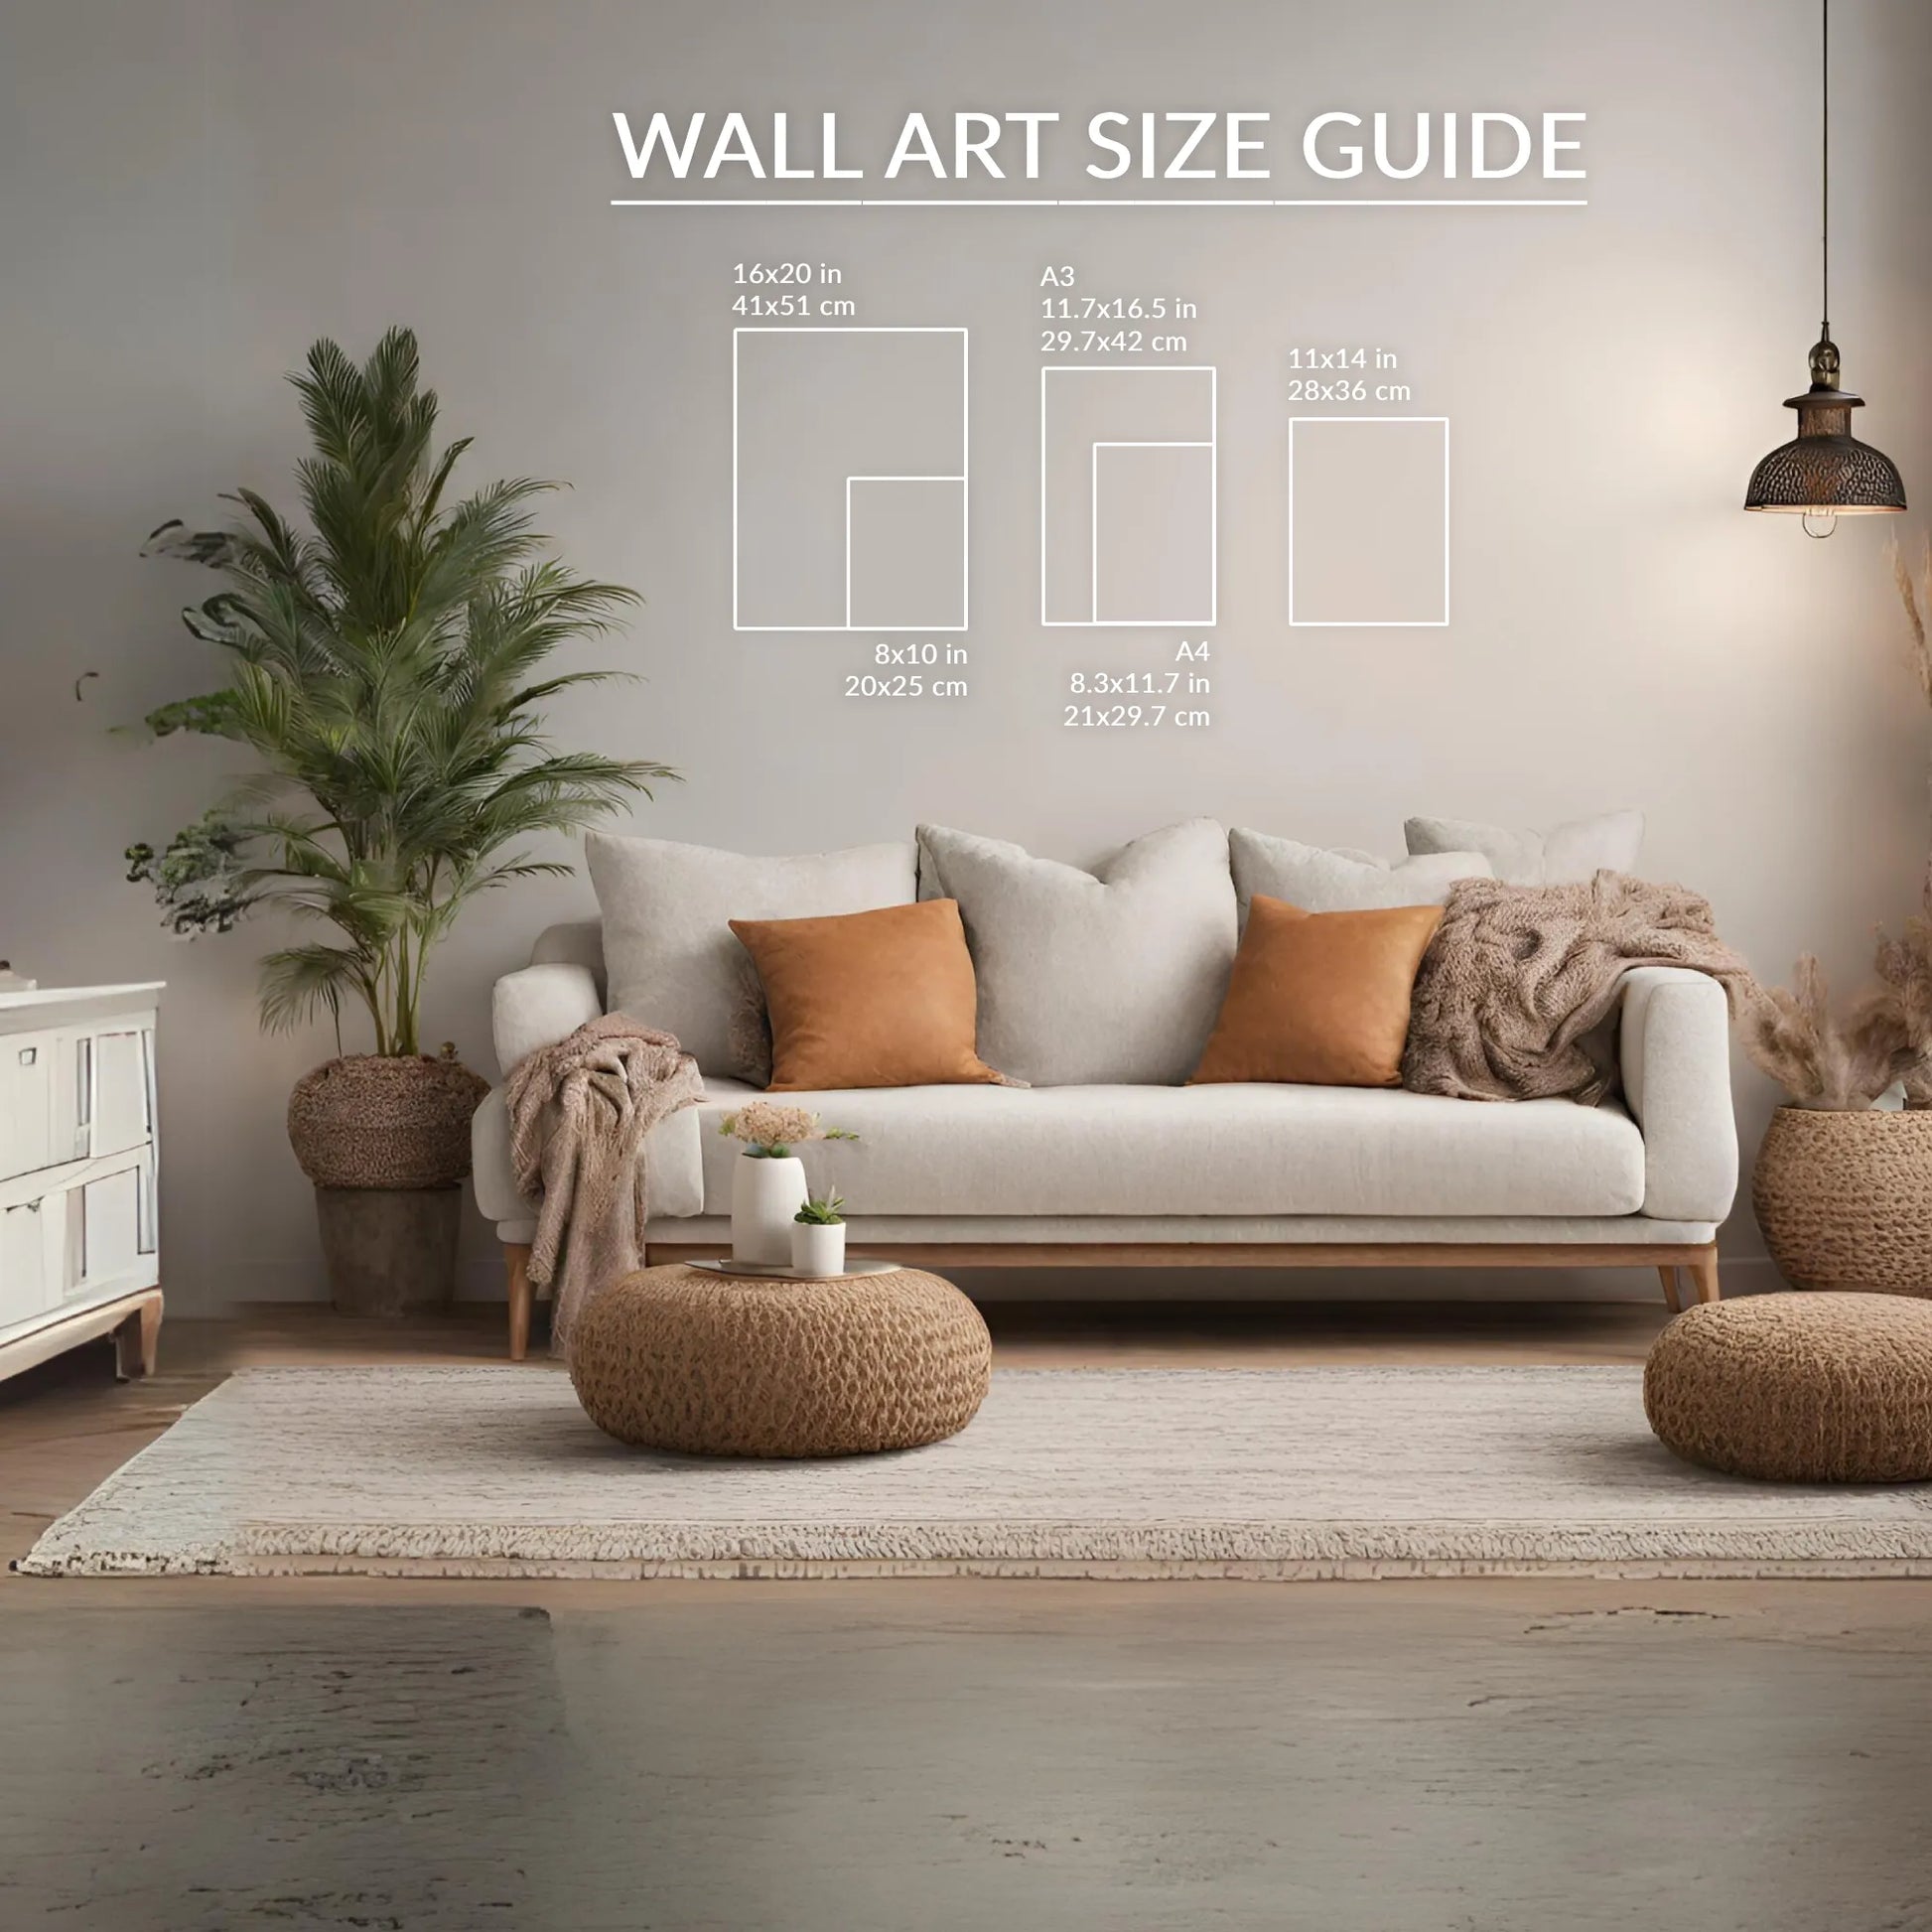 Editable Photo Collage Template Wall Art Size Guide